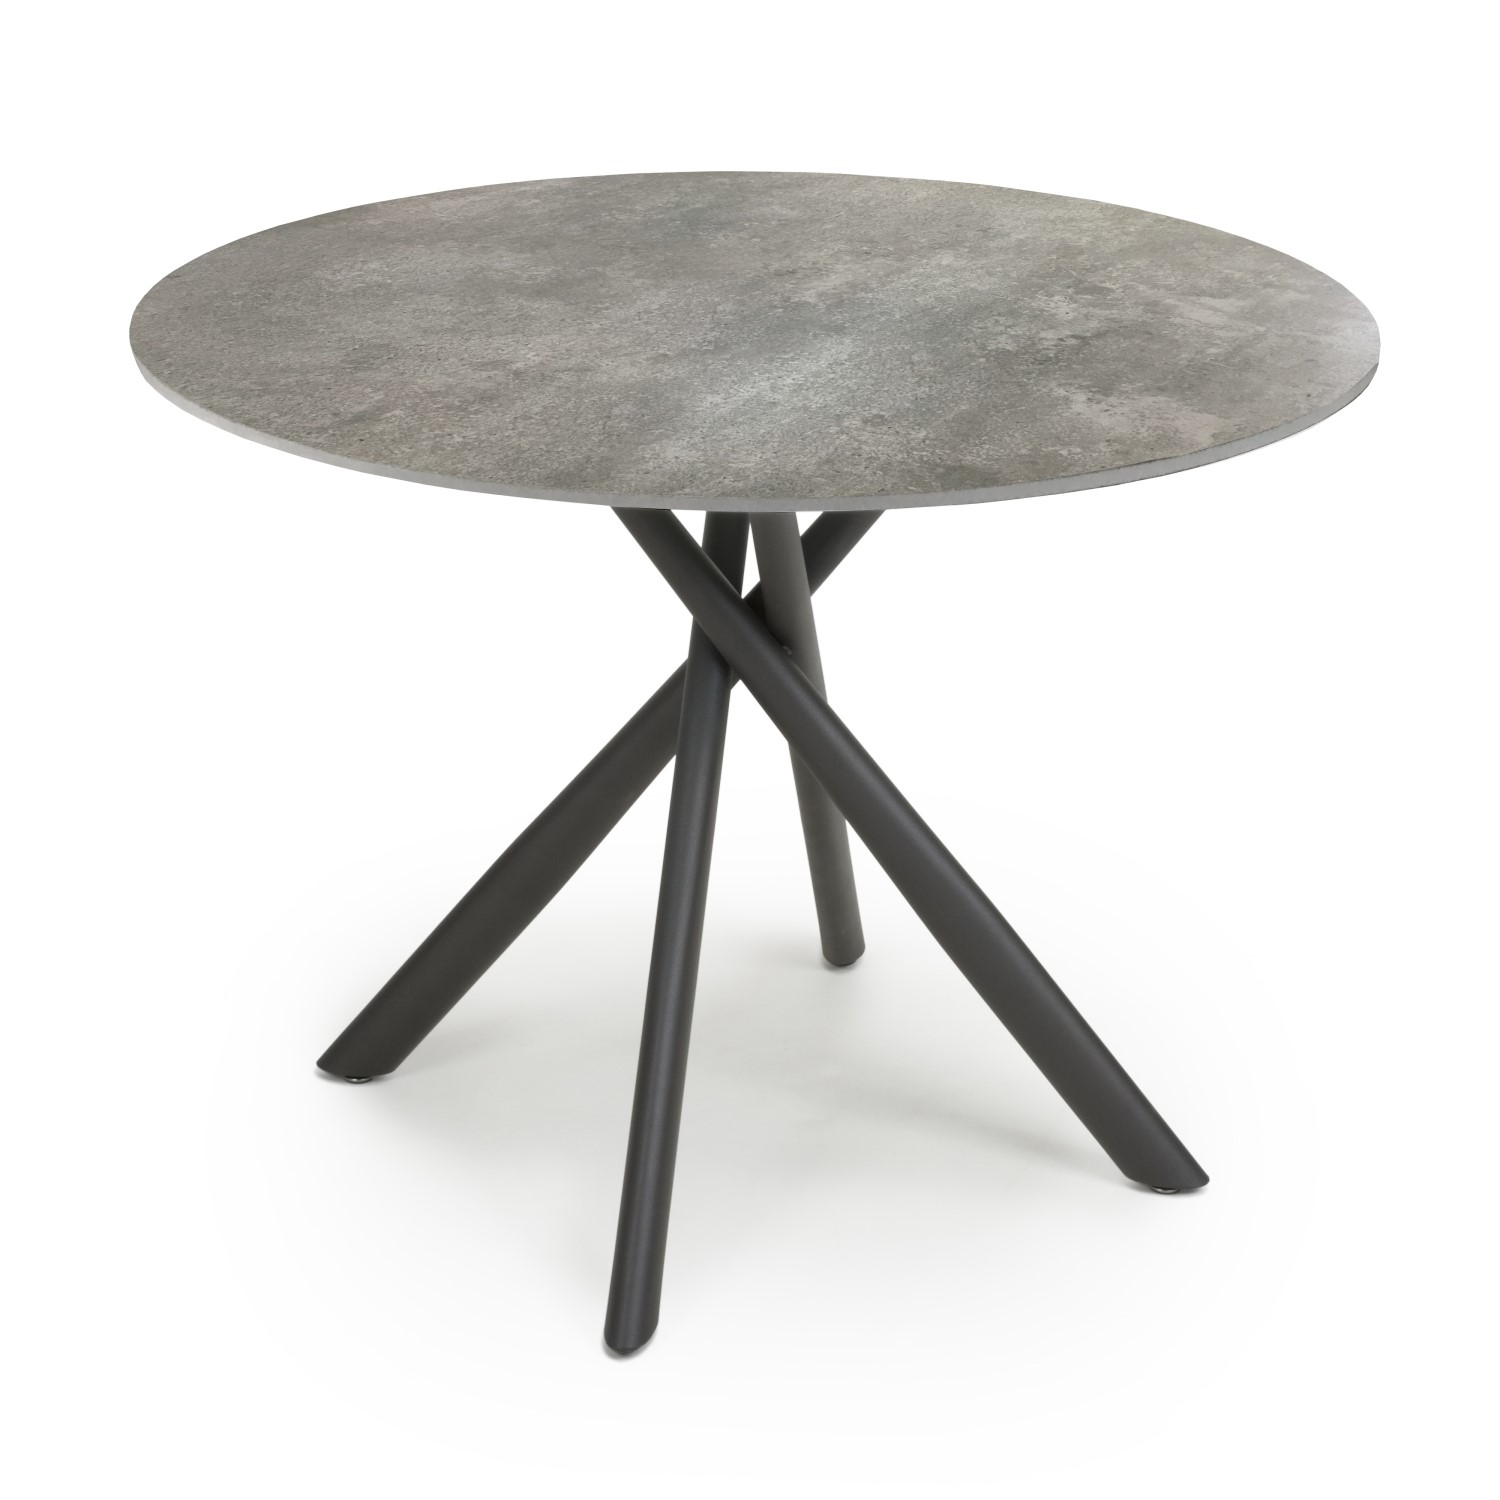 Photo of Round grey concrete effect dining table - seats 4 - avesta